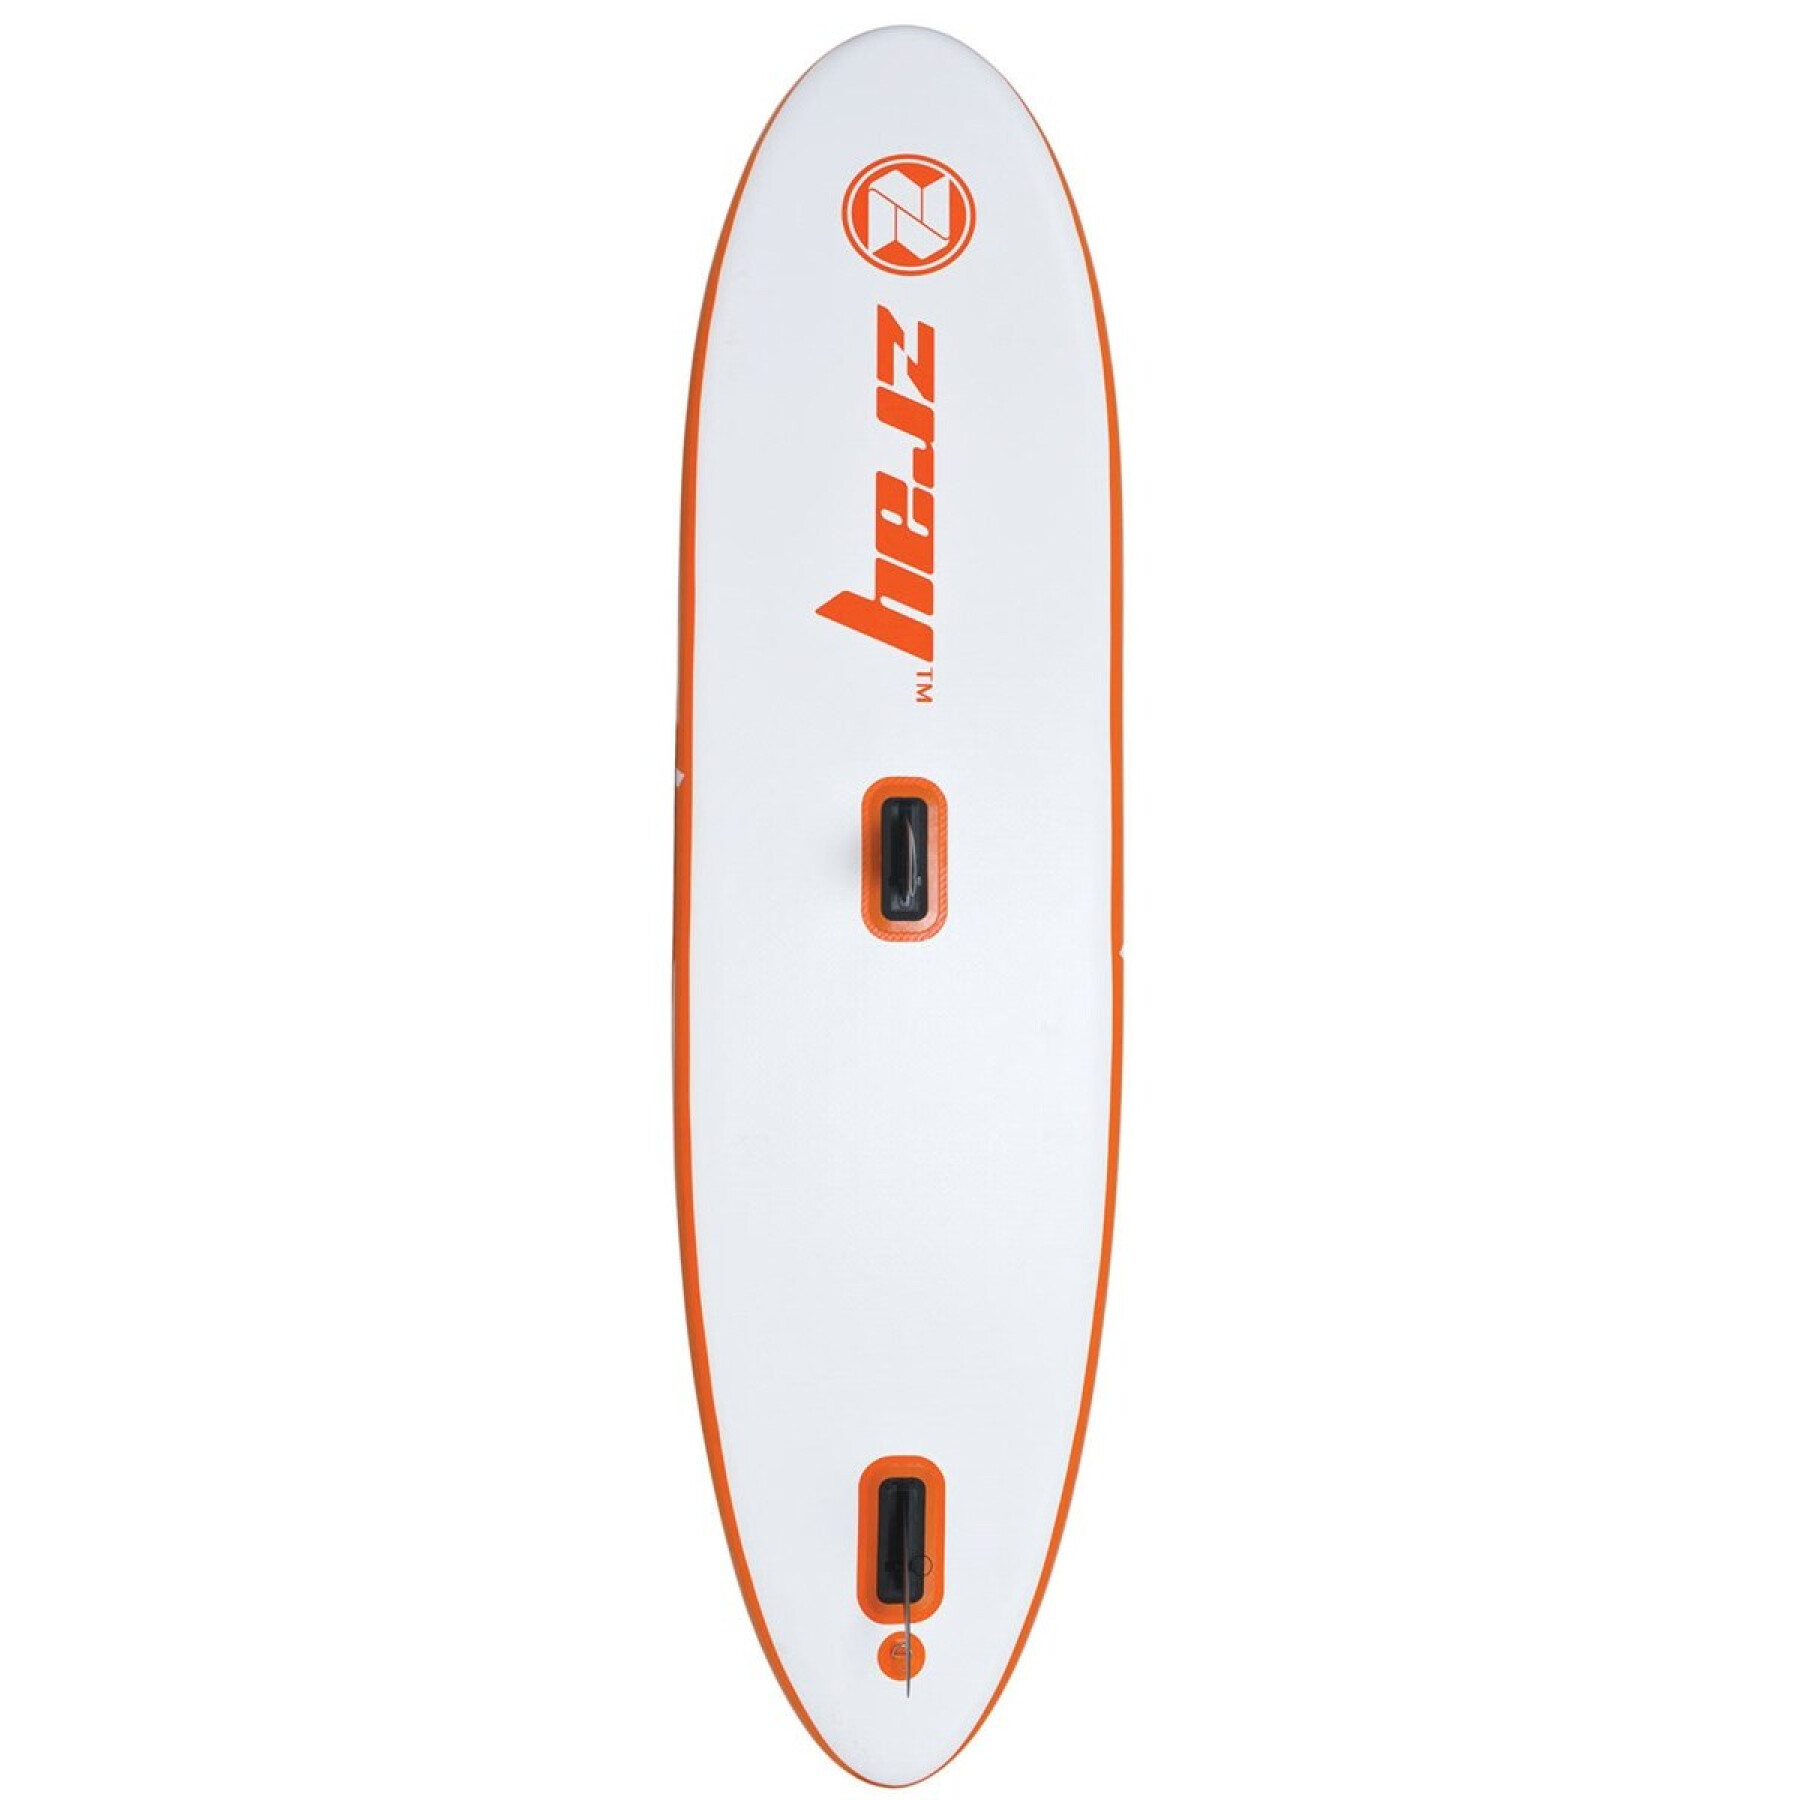 Stand Up Paddle gonflable Zray WindSurf 10'